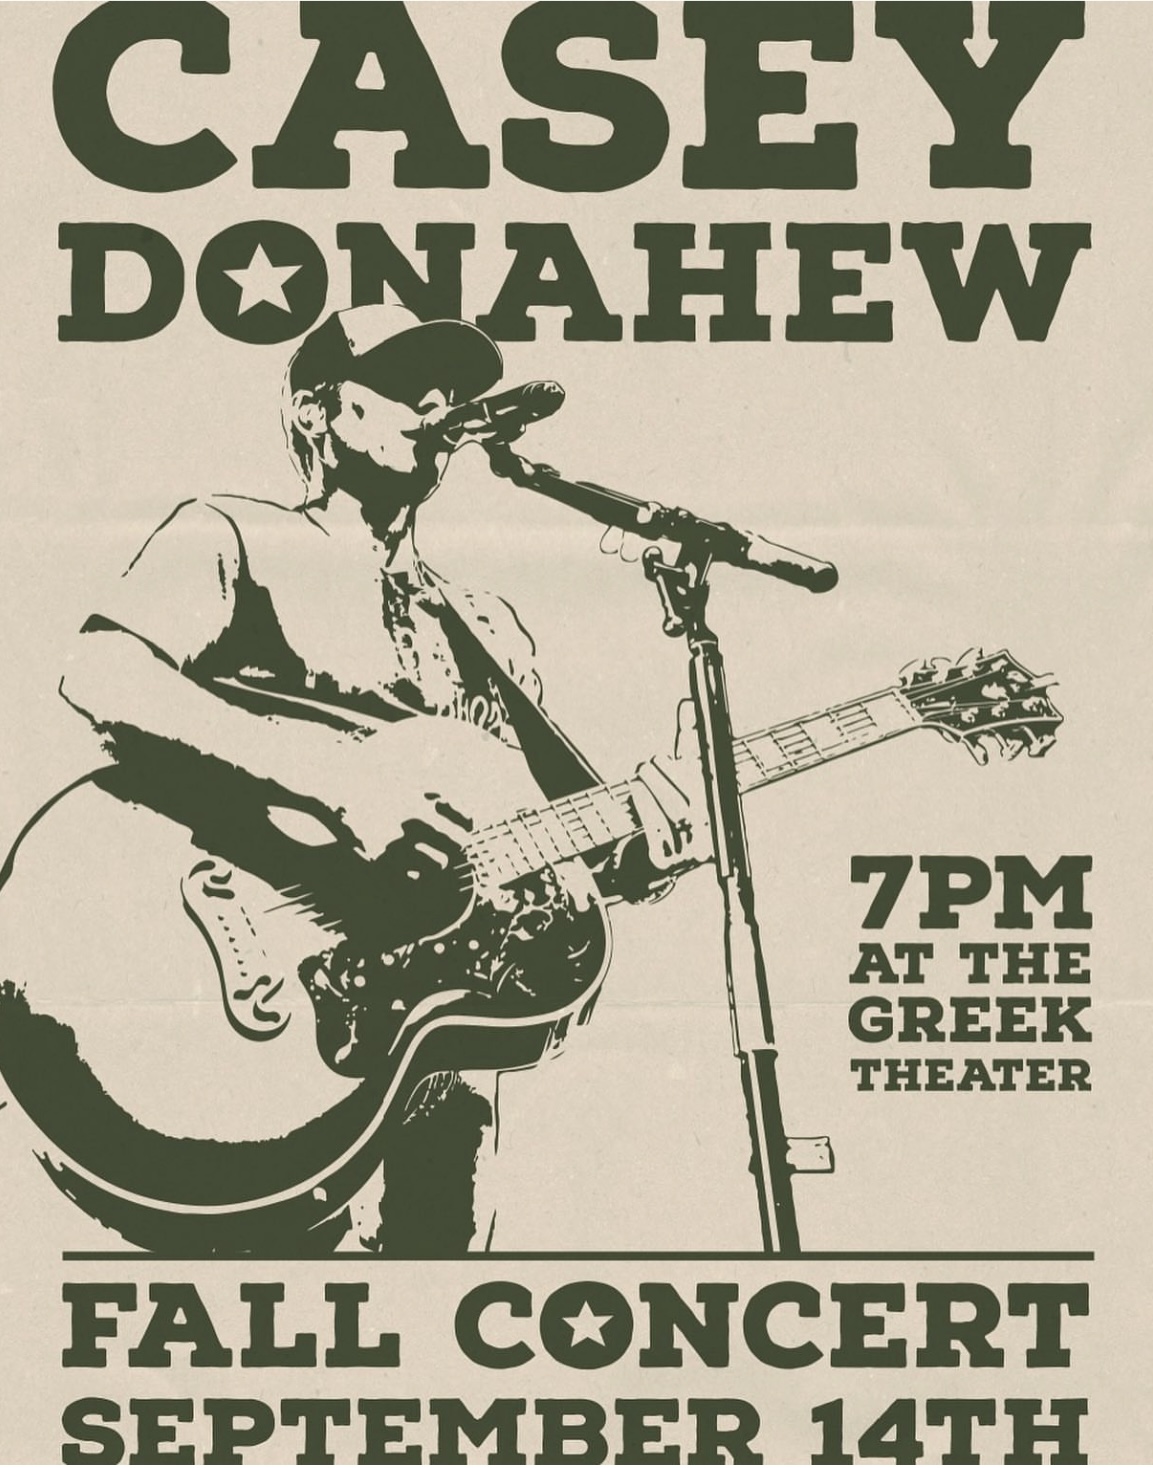 Live music returns to the Greek Theatre